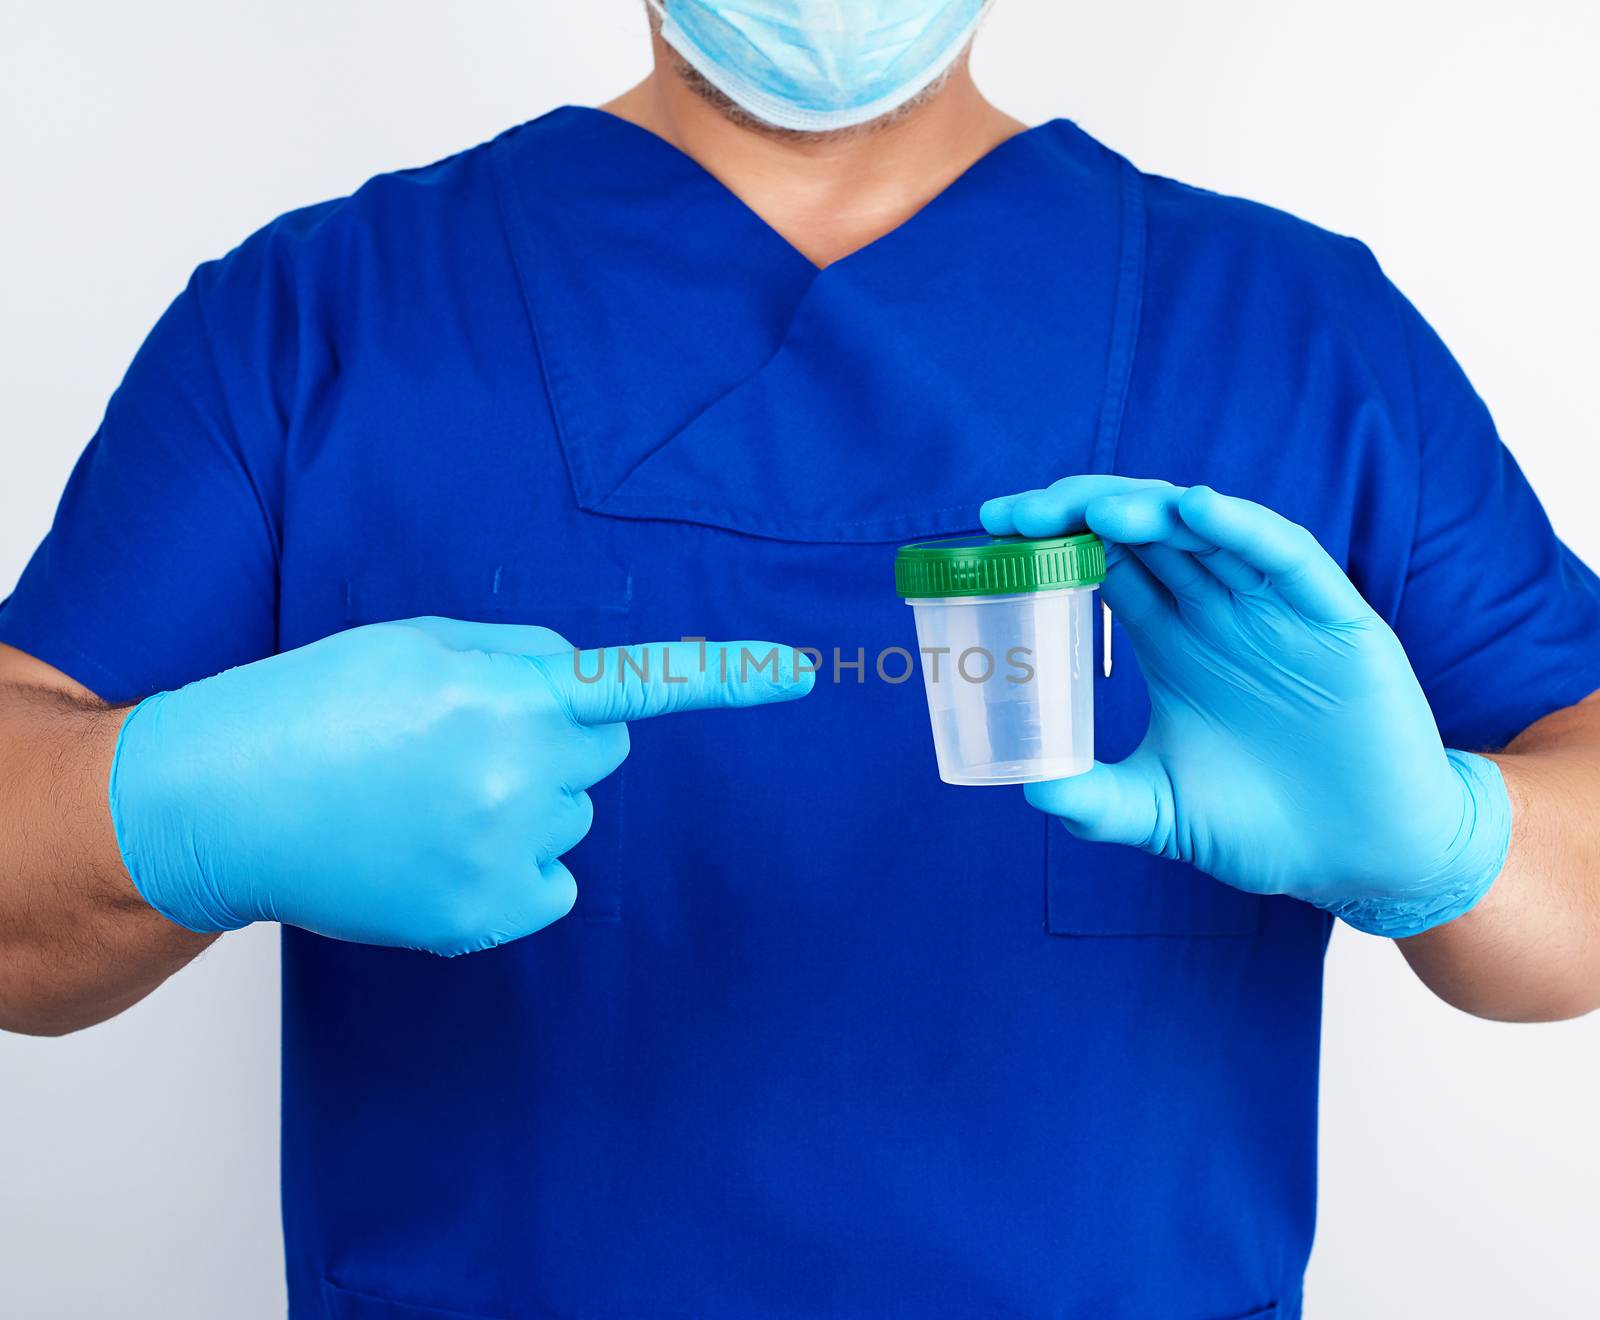 doctor in blue uniform and latex gloves is holding an empty plastic container for taking urine samples, concept of timely diagnosis